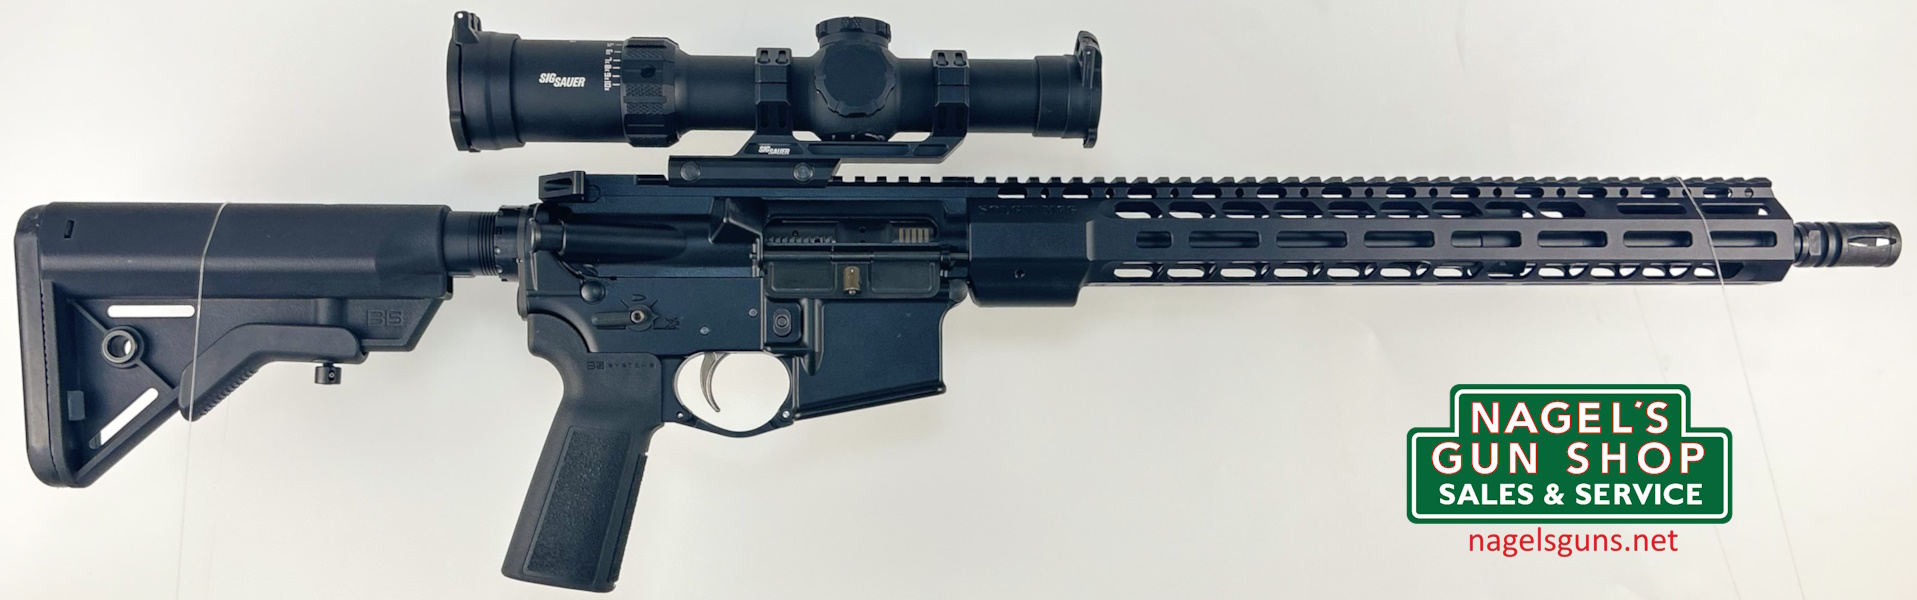 Sons Of Liberty M4 SOLGW M76 5.56x45 Rifle